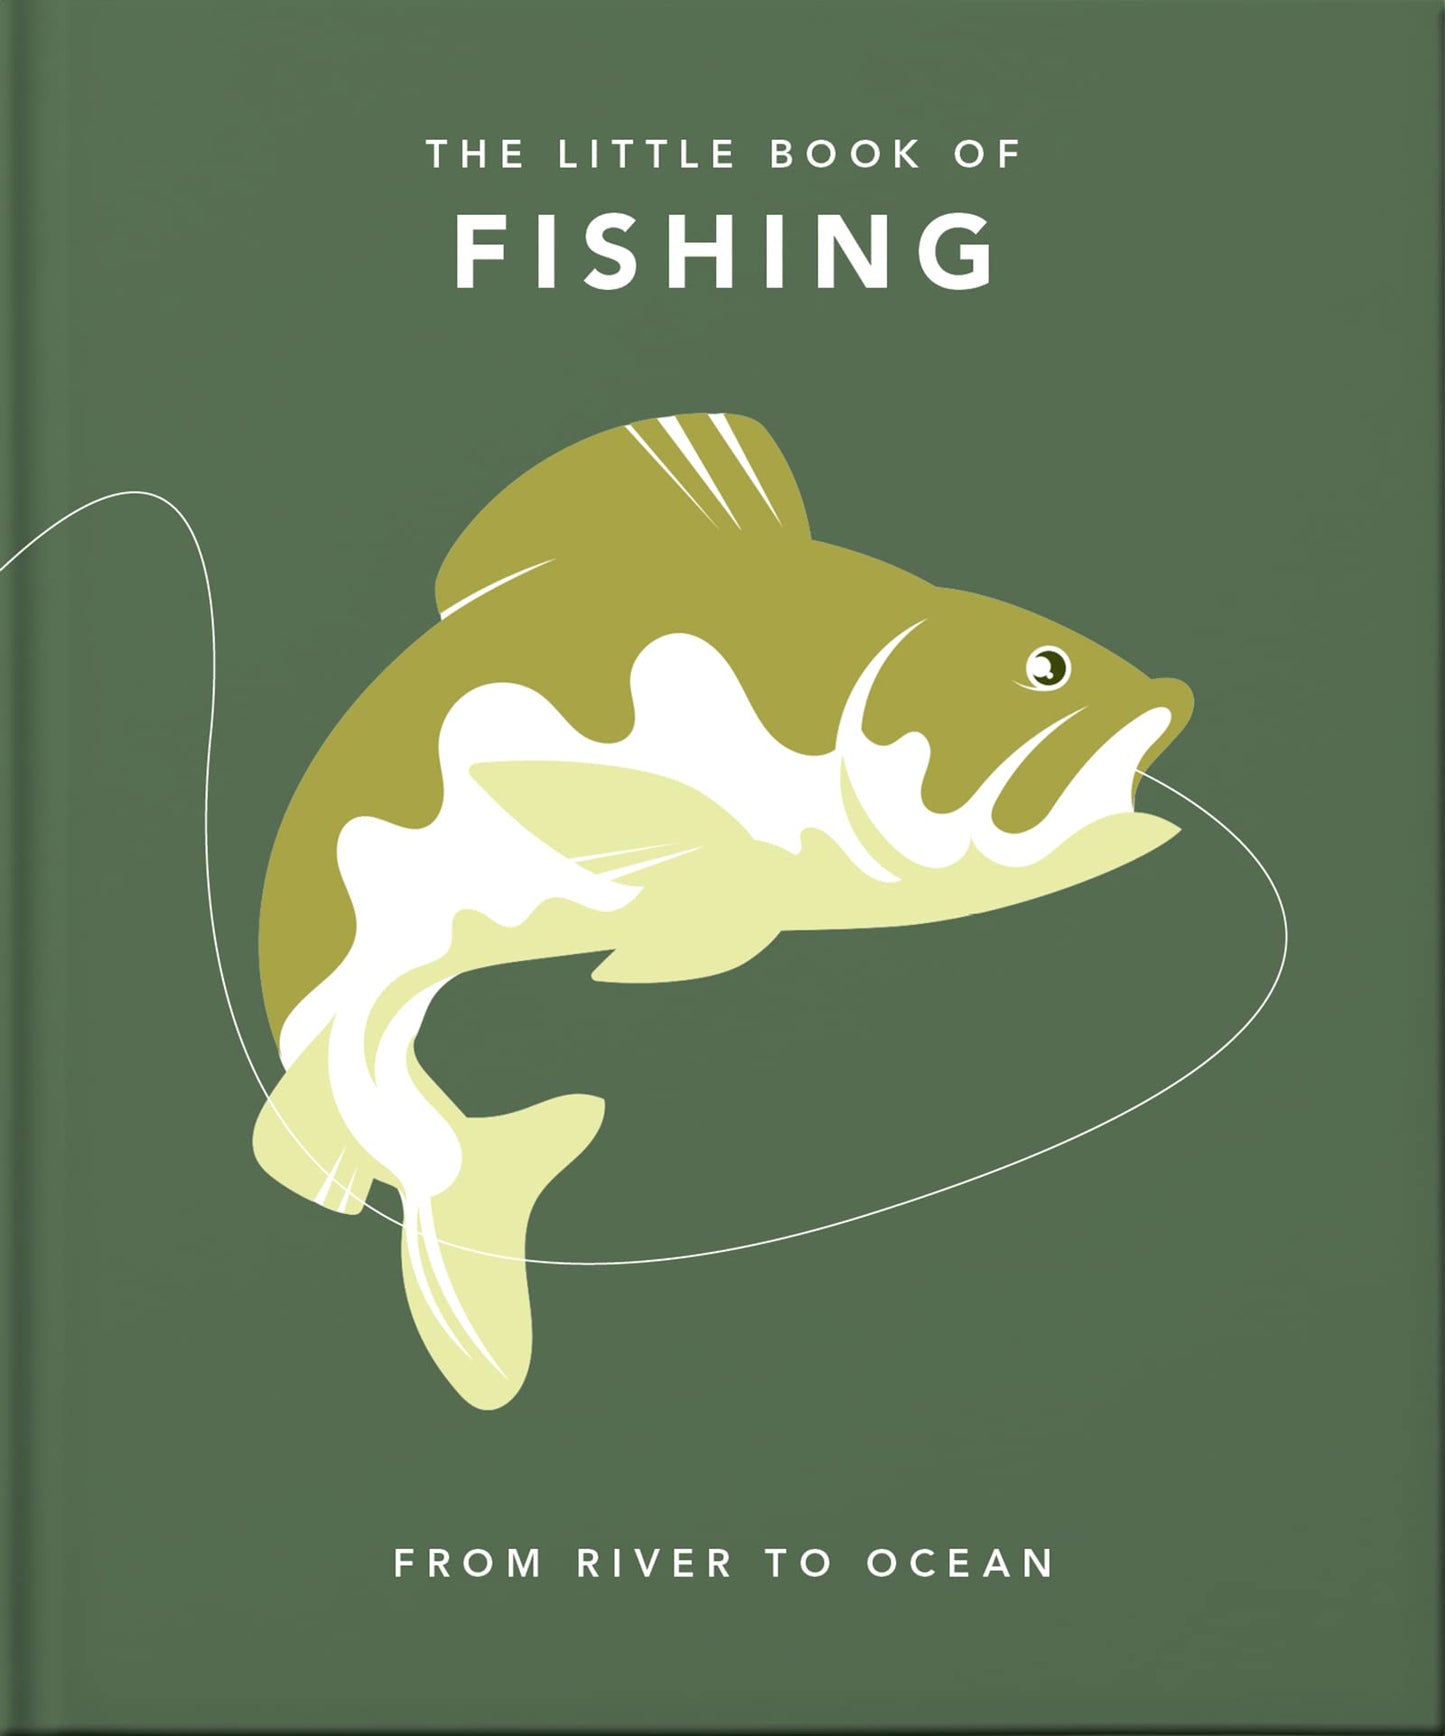 THE LITTLE BOOK OF FISHING